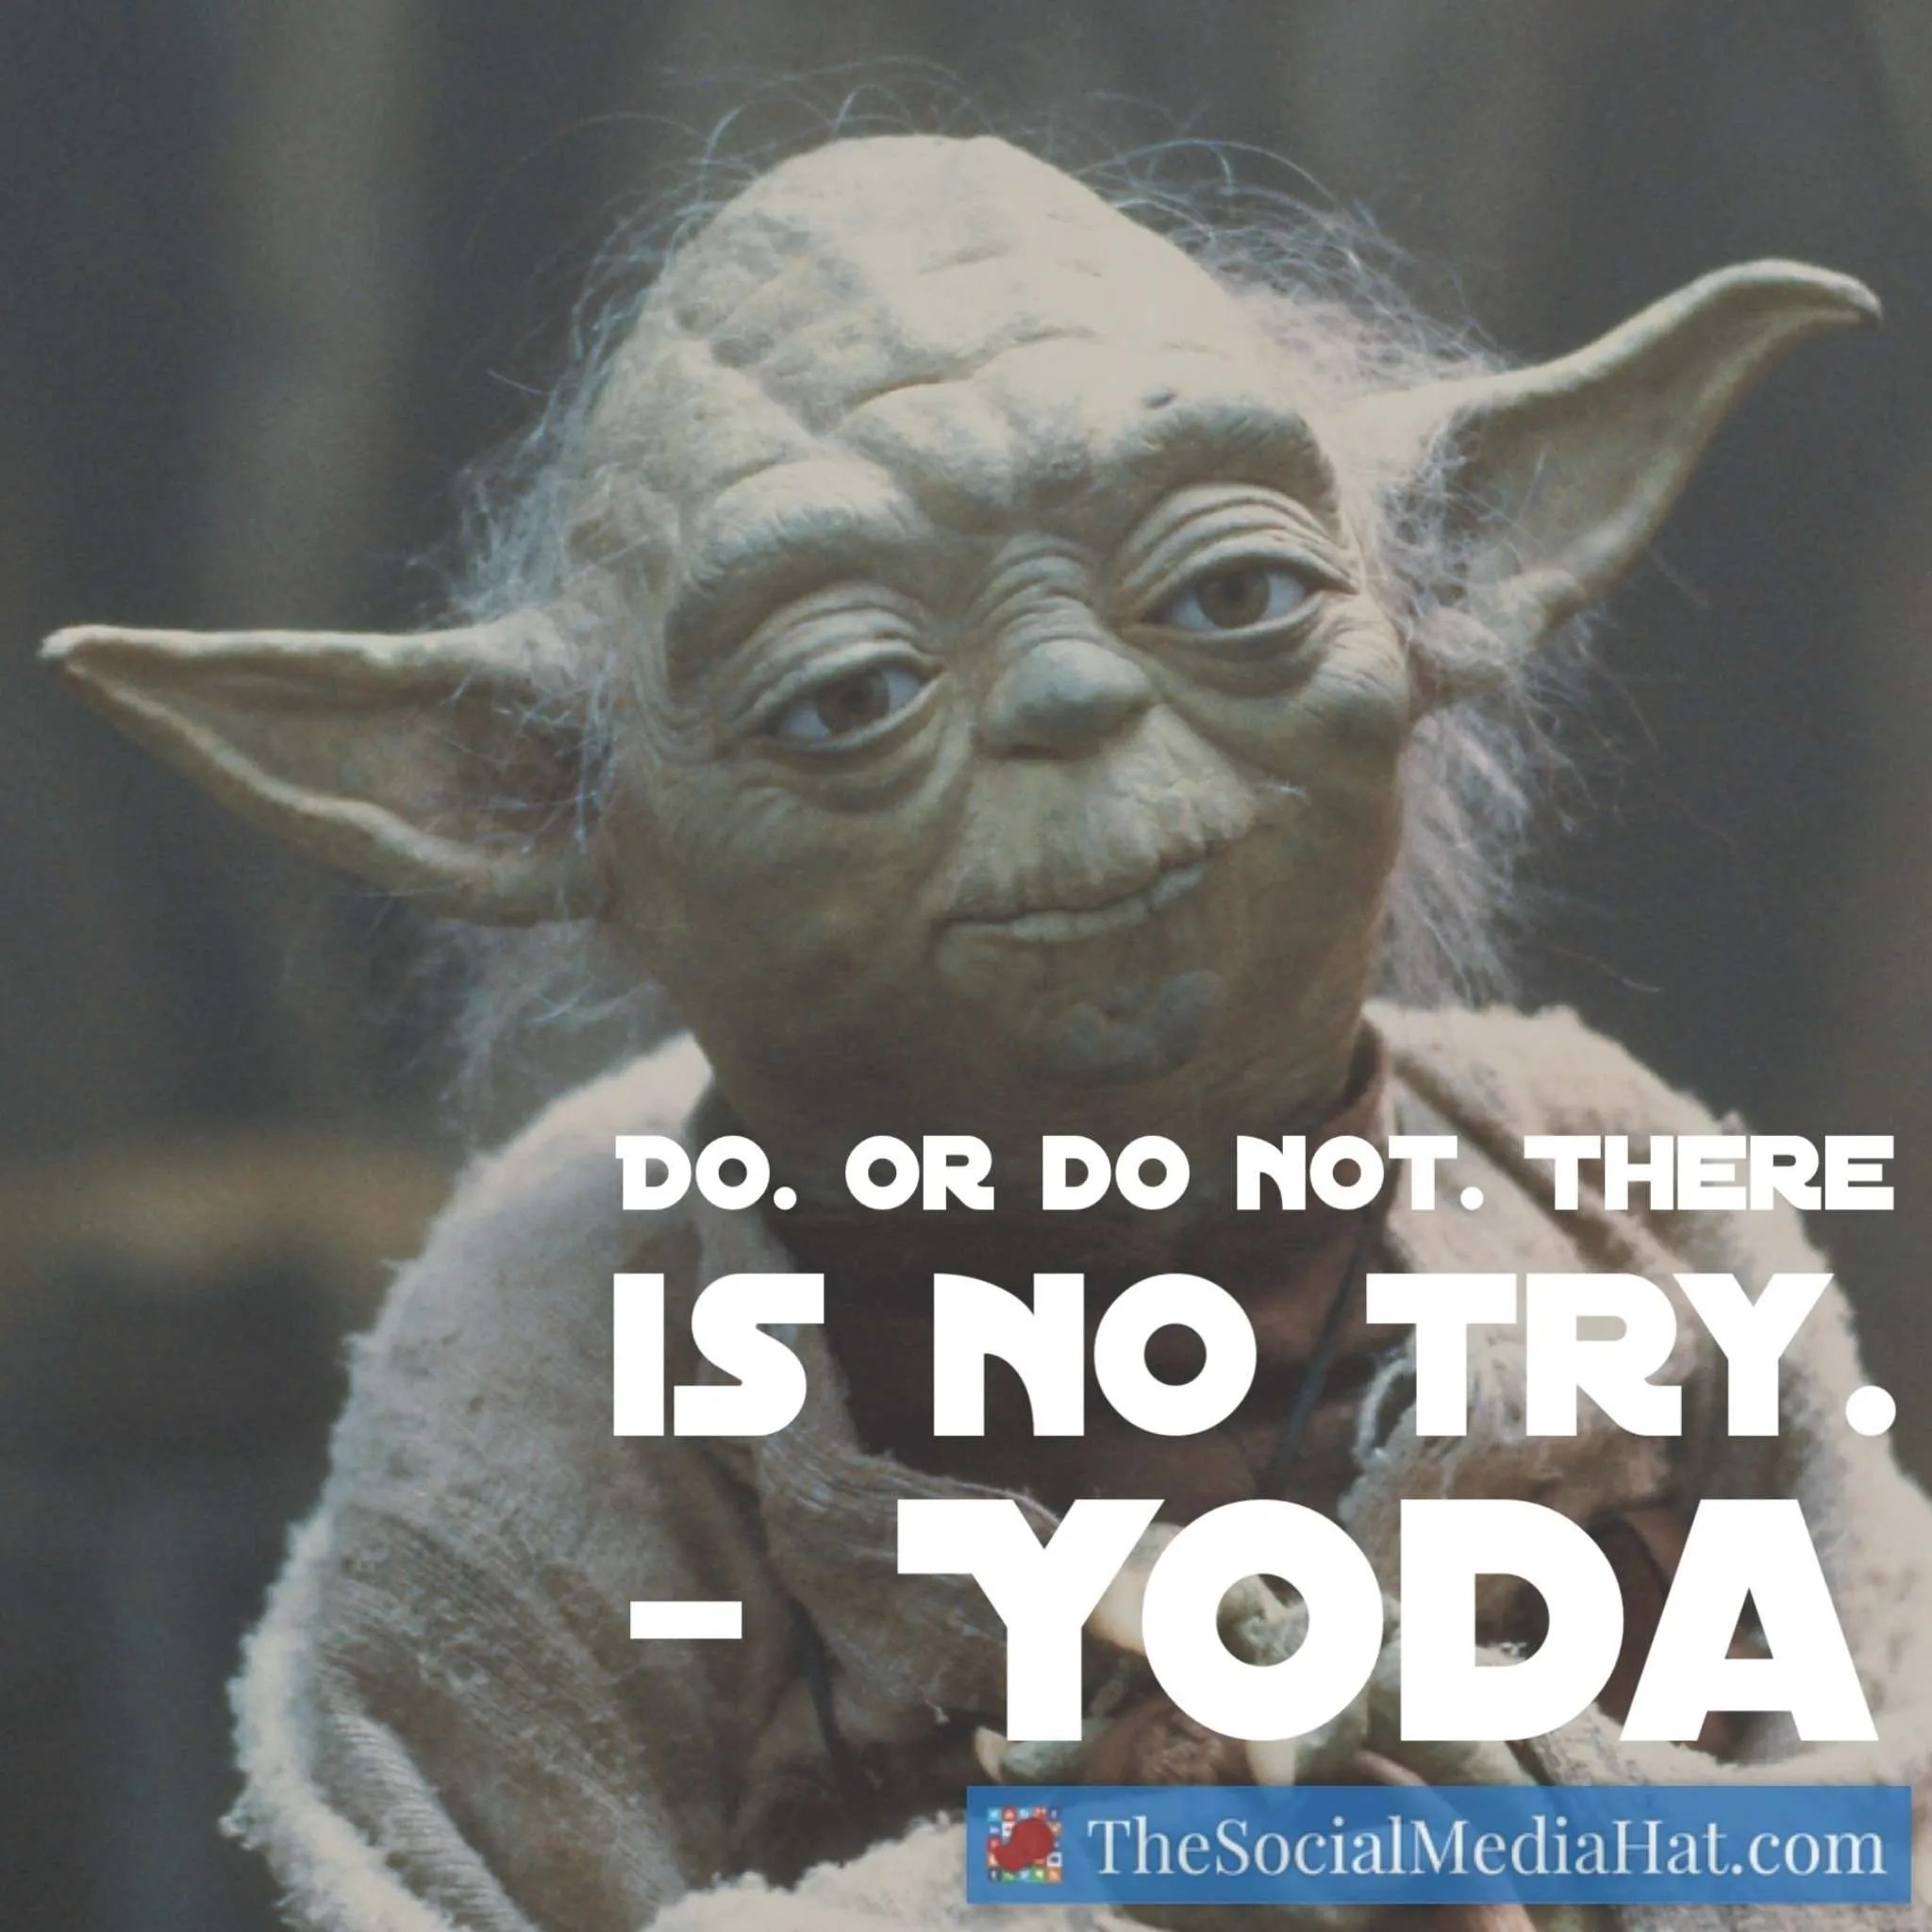 Do. Or do not. There is no try.